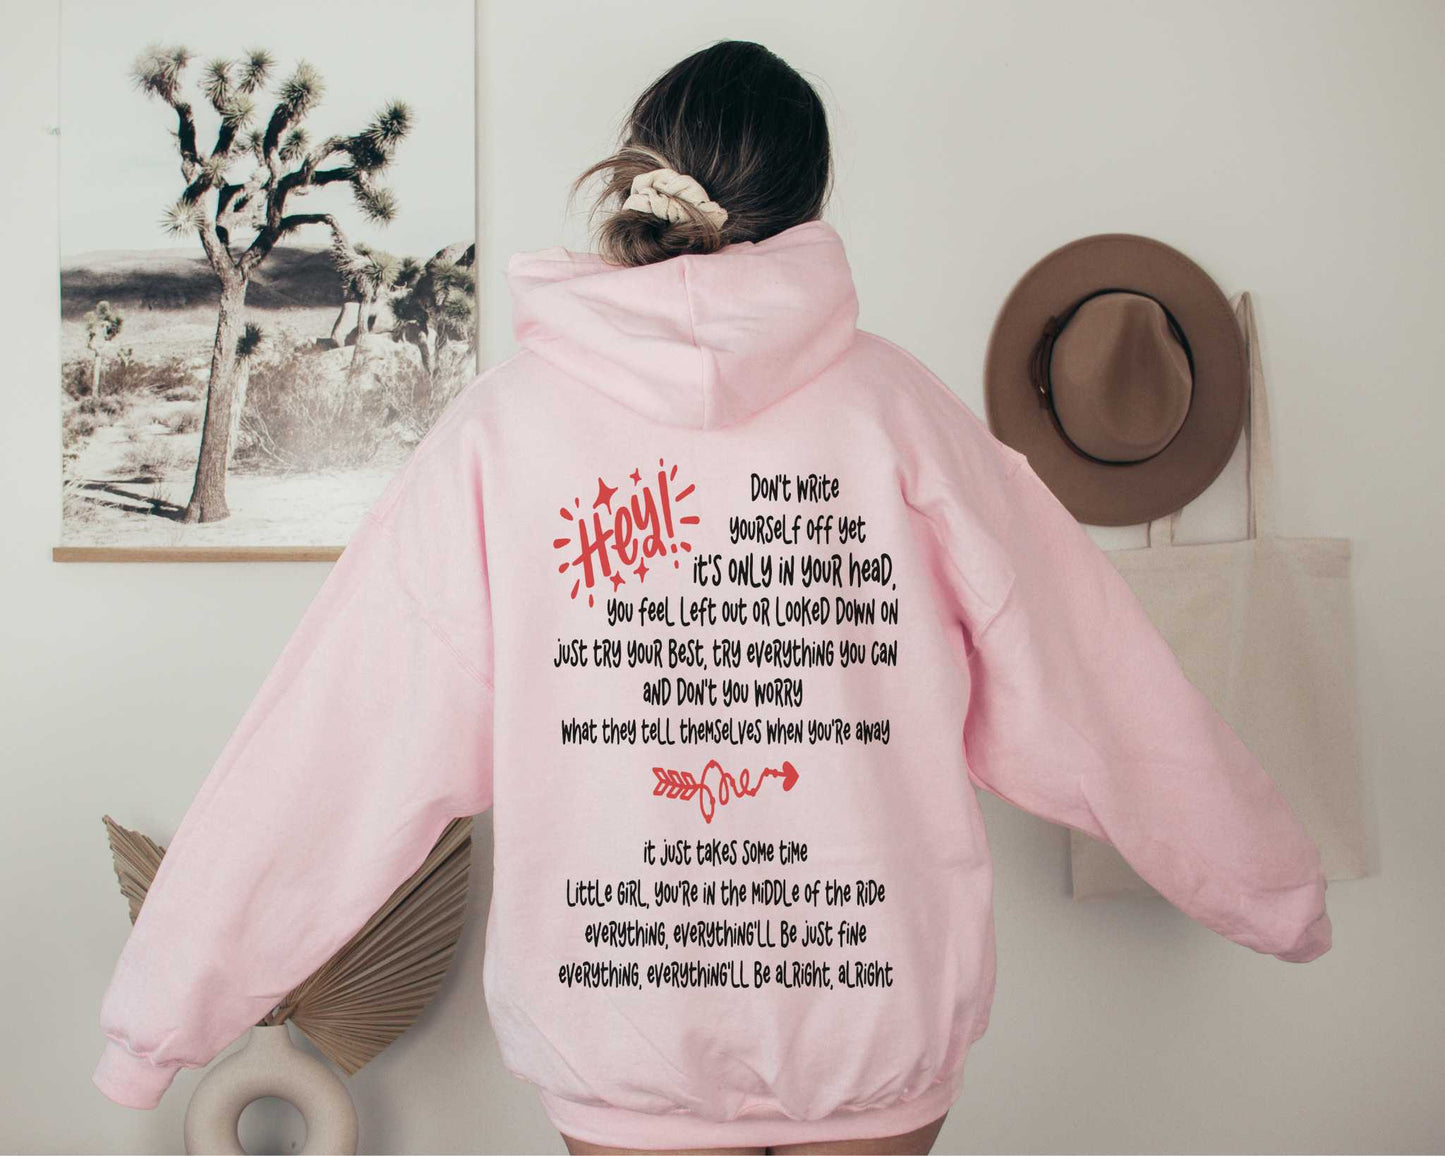 Jimmy Eat World "The Middle" Emo Kid Hoodie in Pink